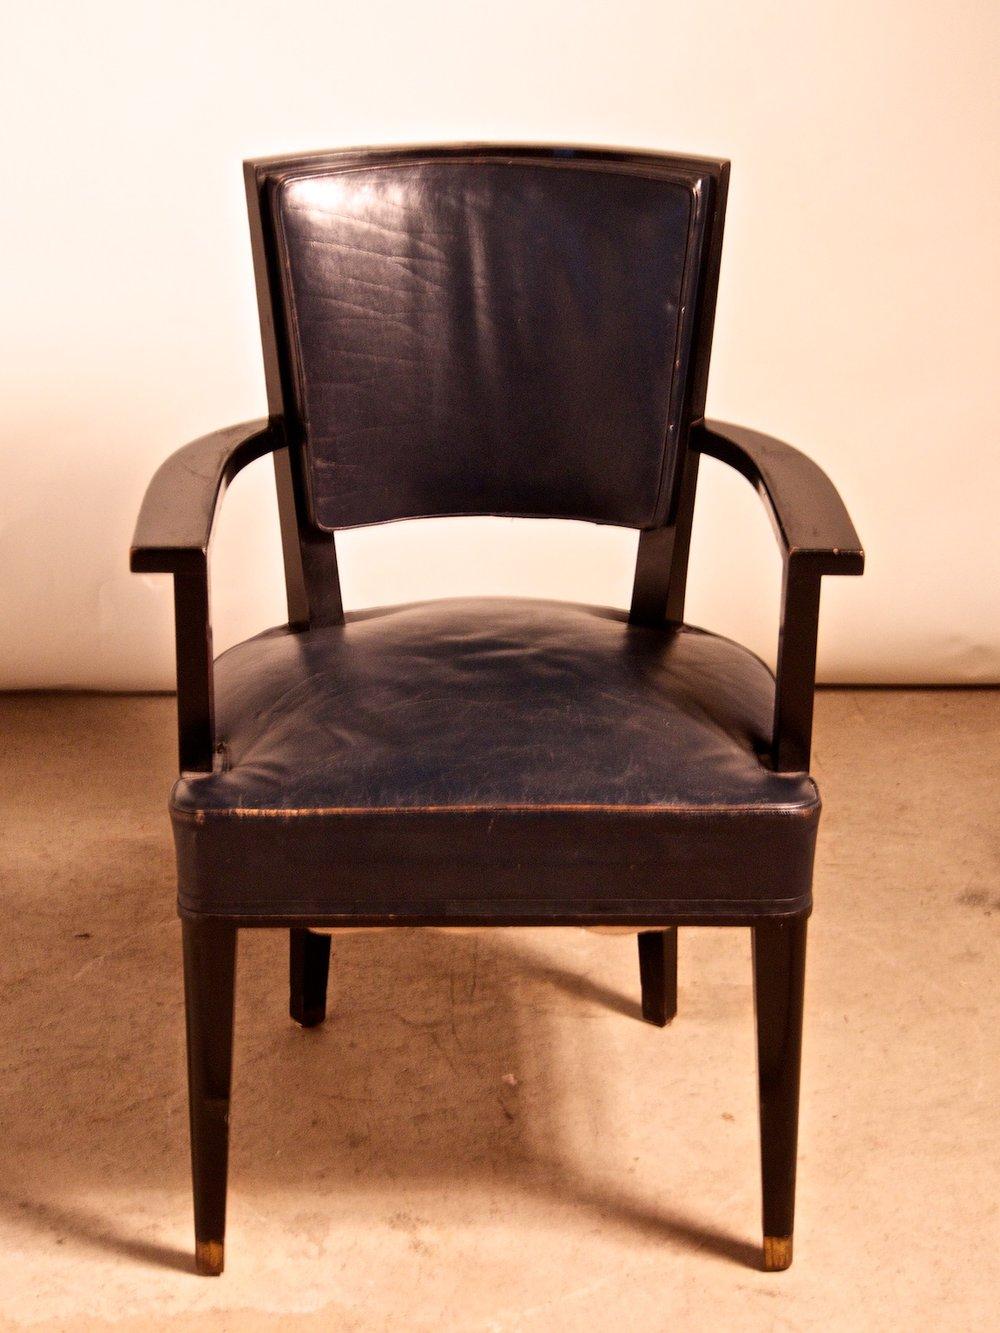 French Fortie Art Deco pair of armchairs by Jacques Adnet in black French polish with bronze mounts. 21.5” wide x 19” deep x 35” high. These chairs are unrestored in the photographs.

JACQUES ADNET

(1900-1984)

An icon of luxurious French